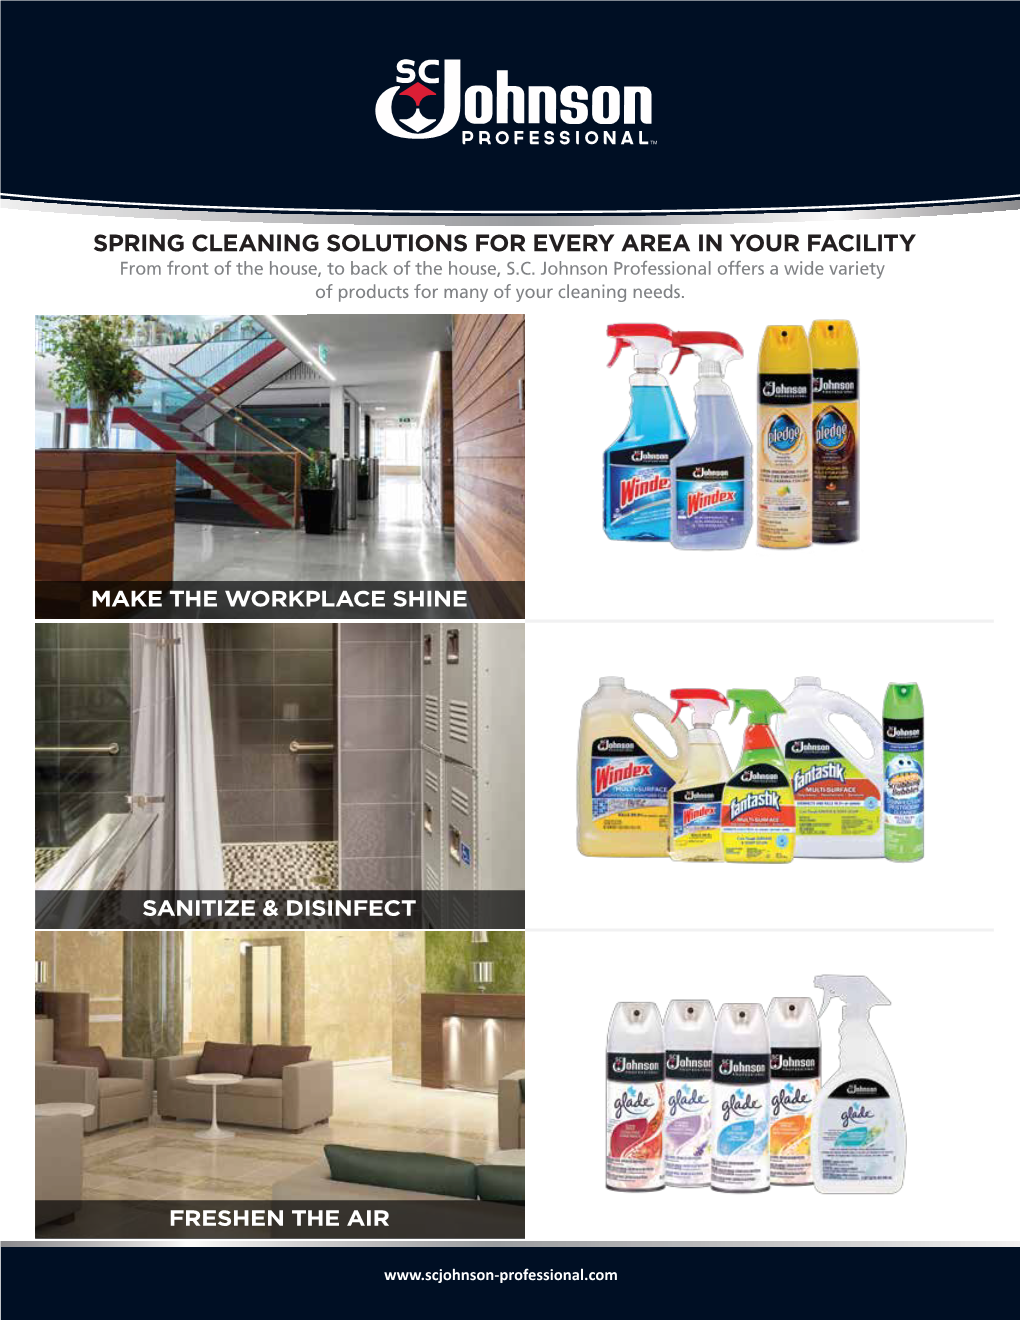 SPRING CLEANING SOLUTIONS for EVERY AREA in YOUR FACILITY from Front of the House, to Back of the House, S.C